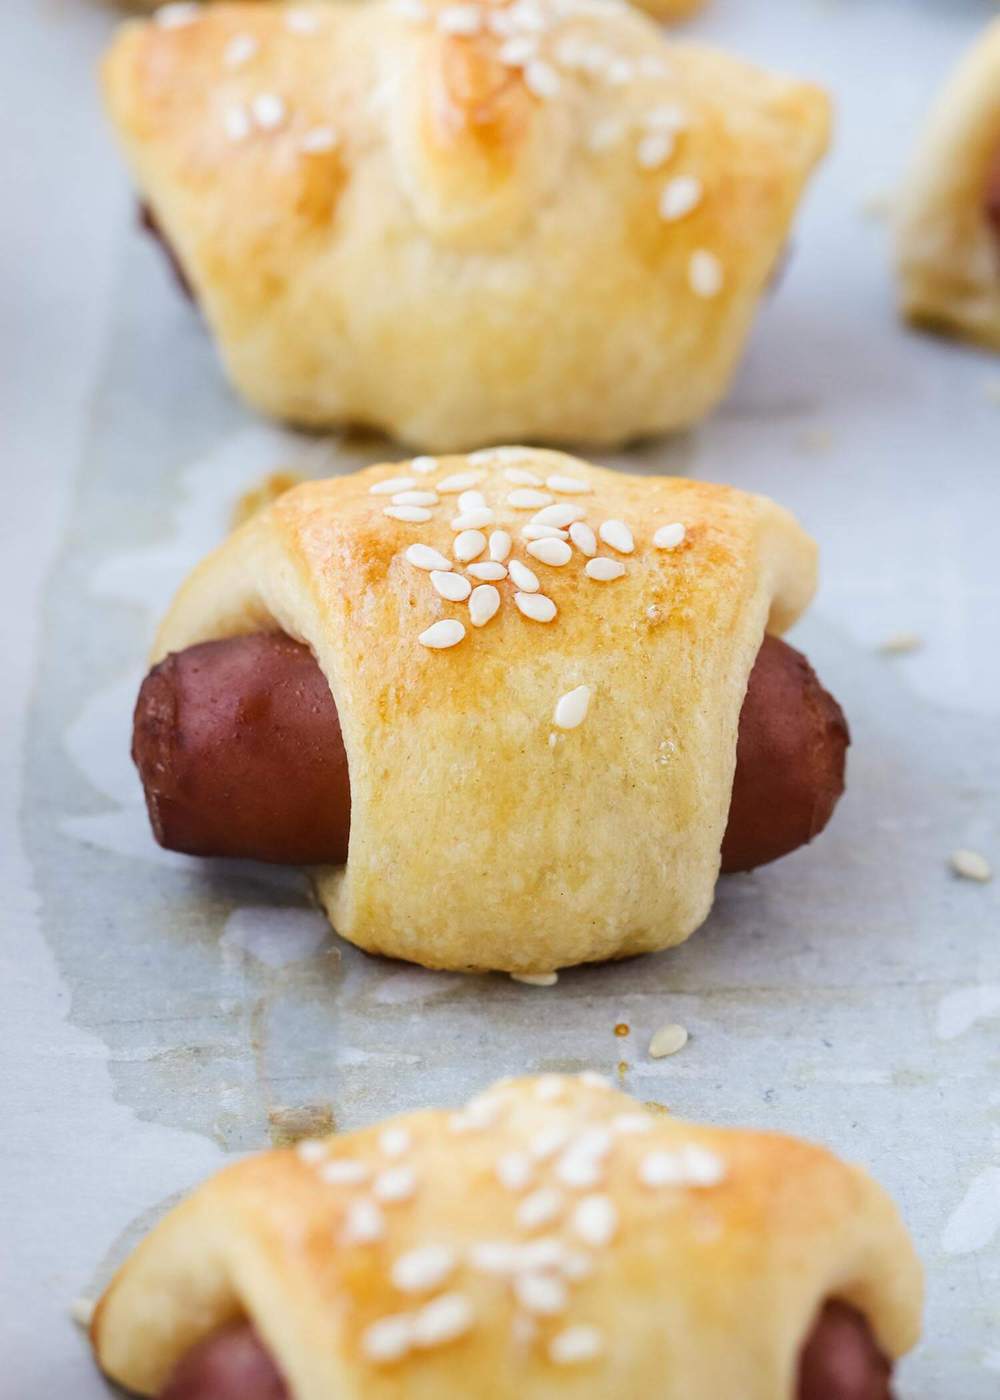 How to make pigs in a blanket.